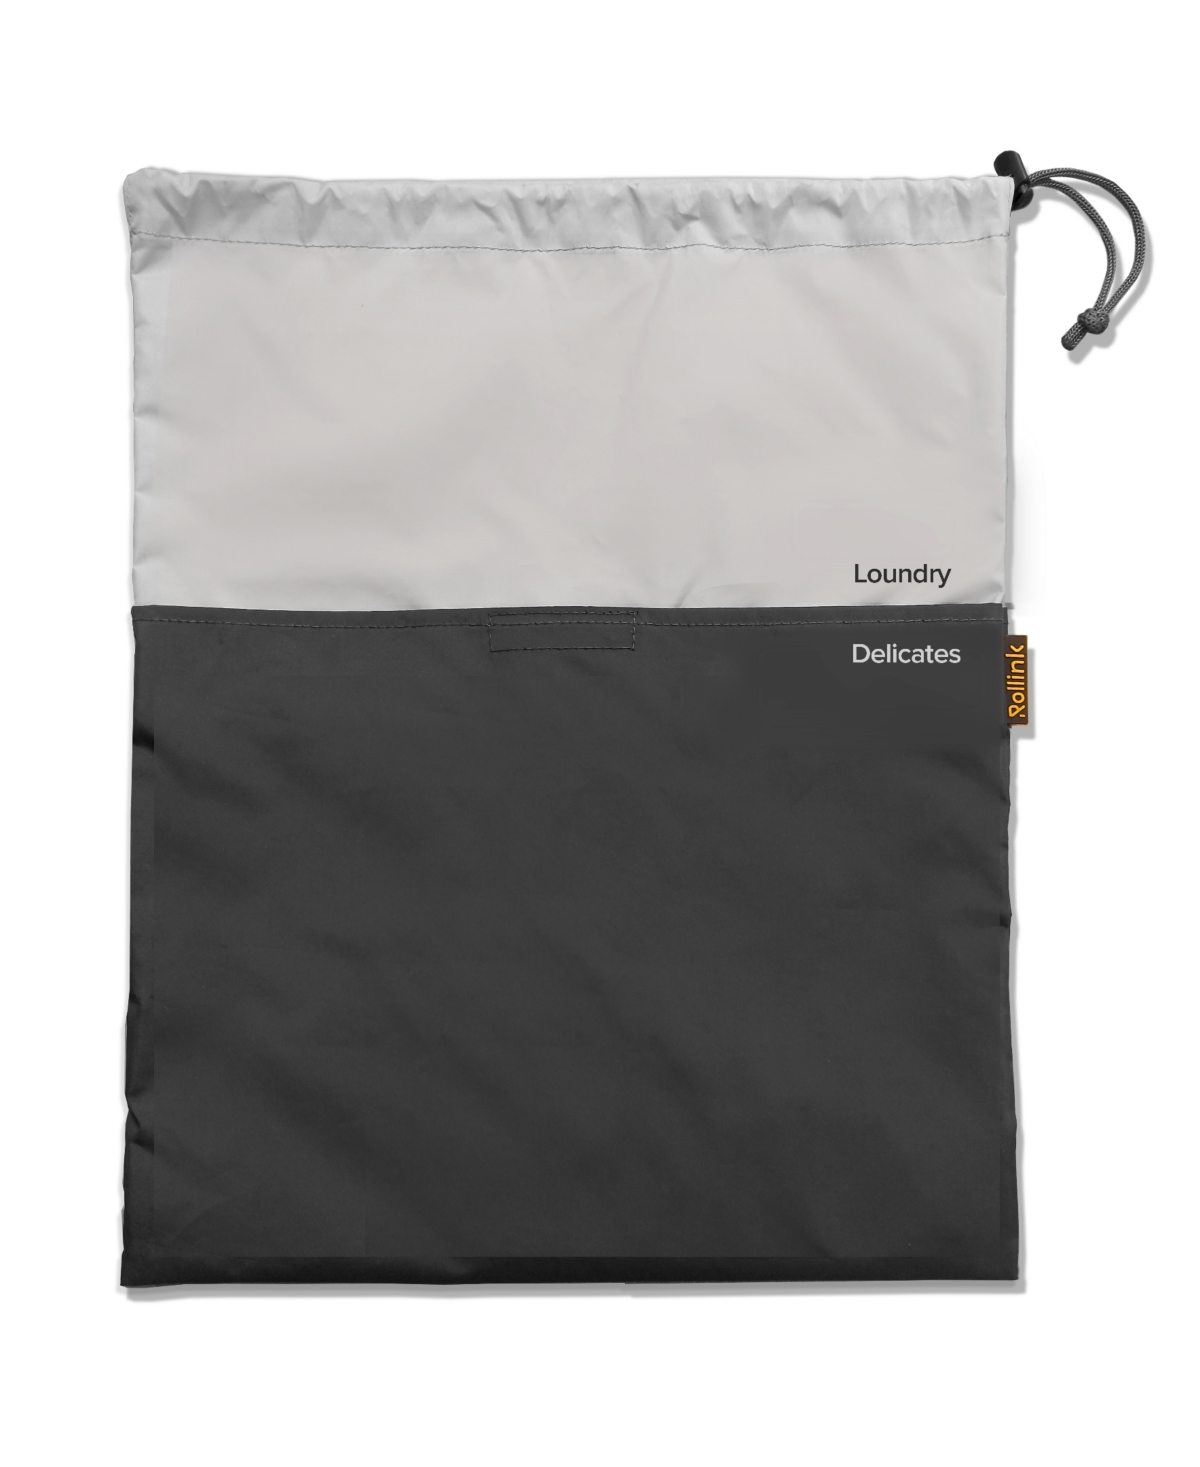 Travel Laundry Bag, 2 Compartment - Silver-Tone Gray